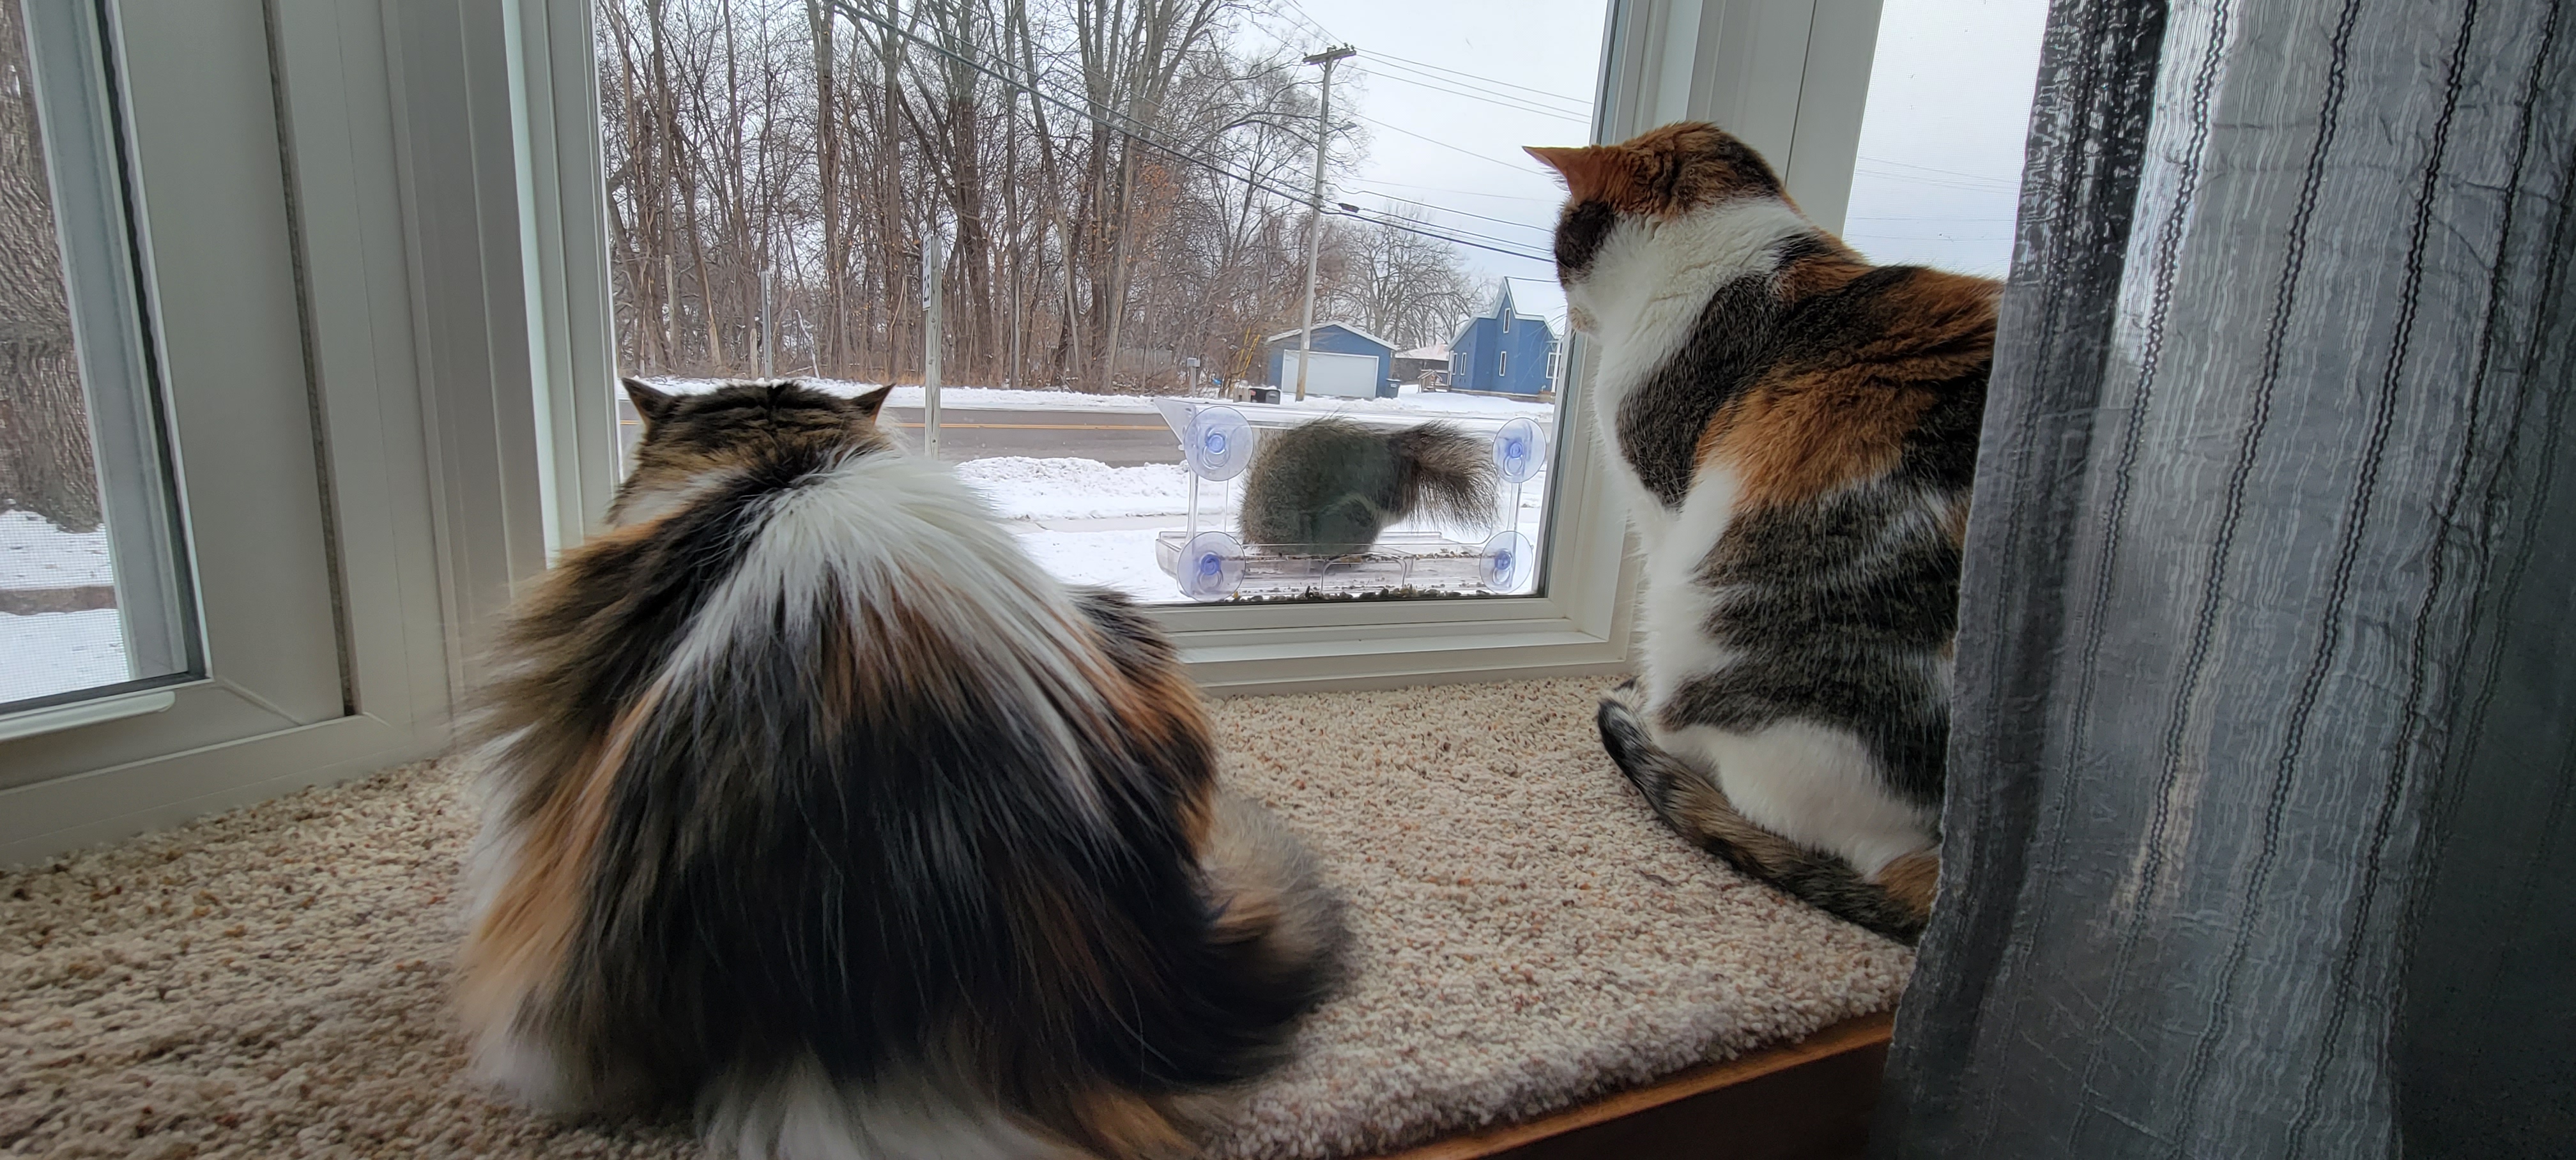 We have a bird feeder on our front window for the birds to give our cats some entertainment.